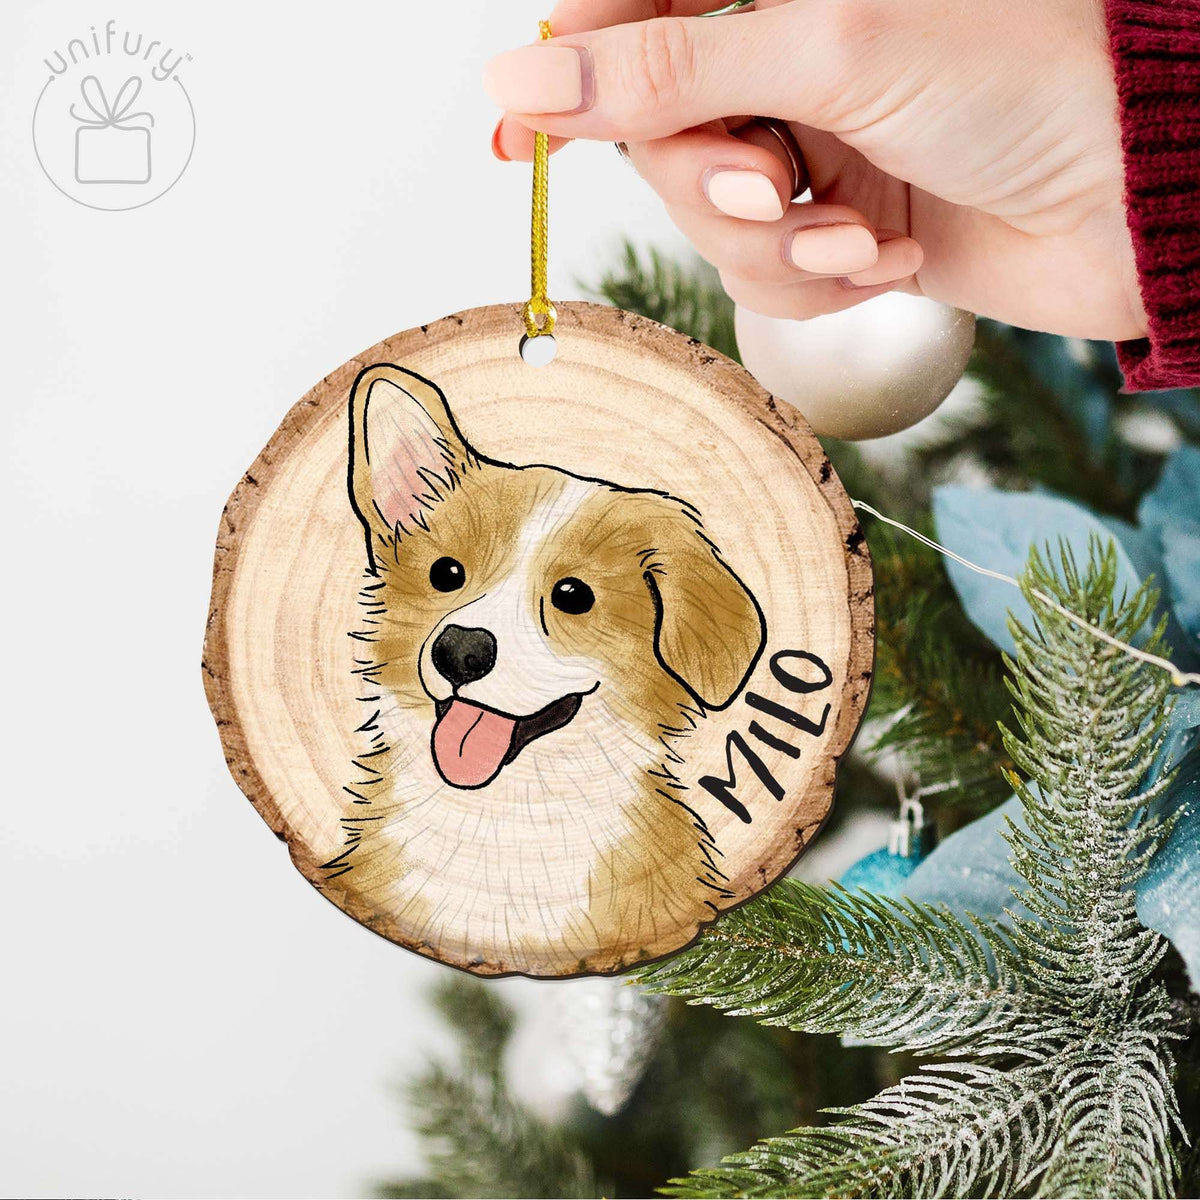 Unique Pet&#39;s Face Wooden Ornament - Hand-Draw Dog Potrait From Photo - Gifts For Dog Mom, Dad, Dog Lovers